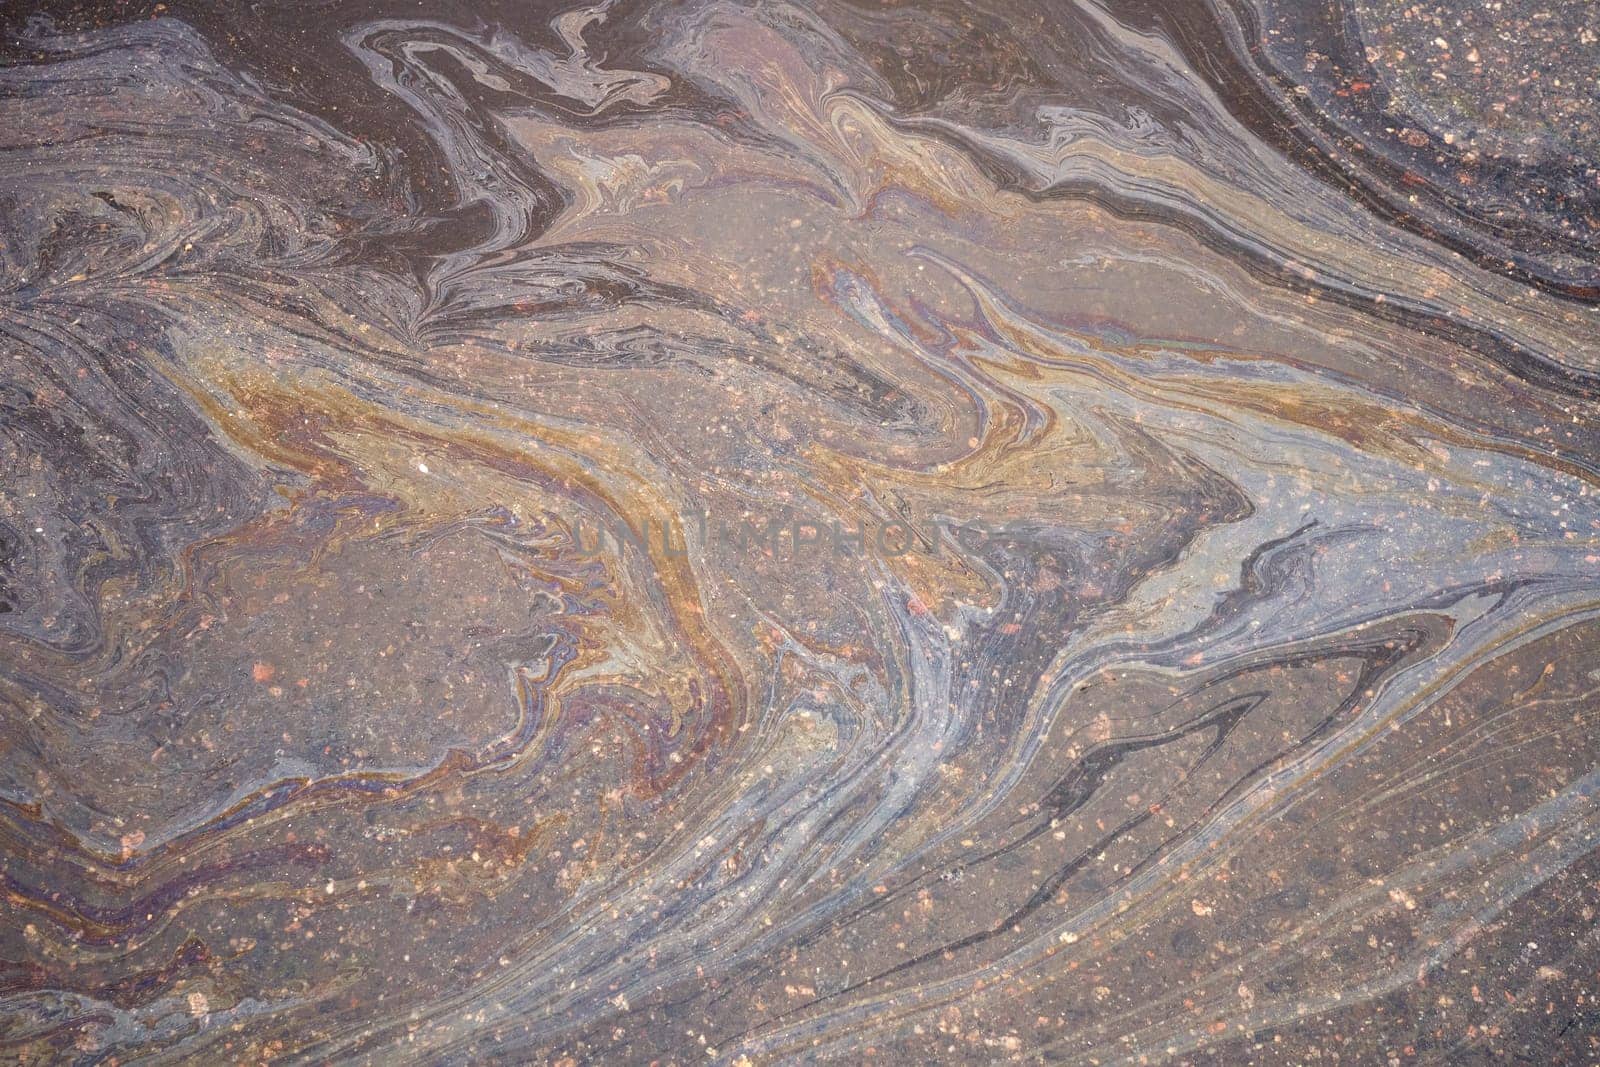 Oily film of rainbow oil or gasoline spill on the surface of a puddle, top view. Environmental problems concept